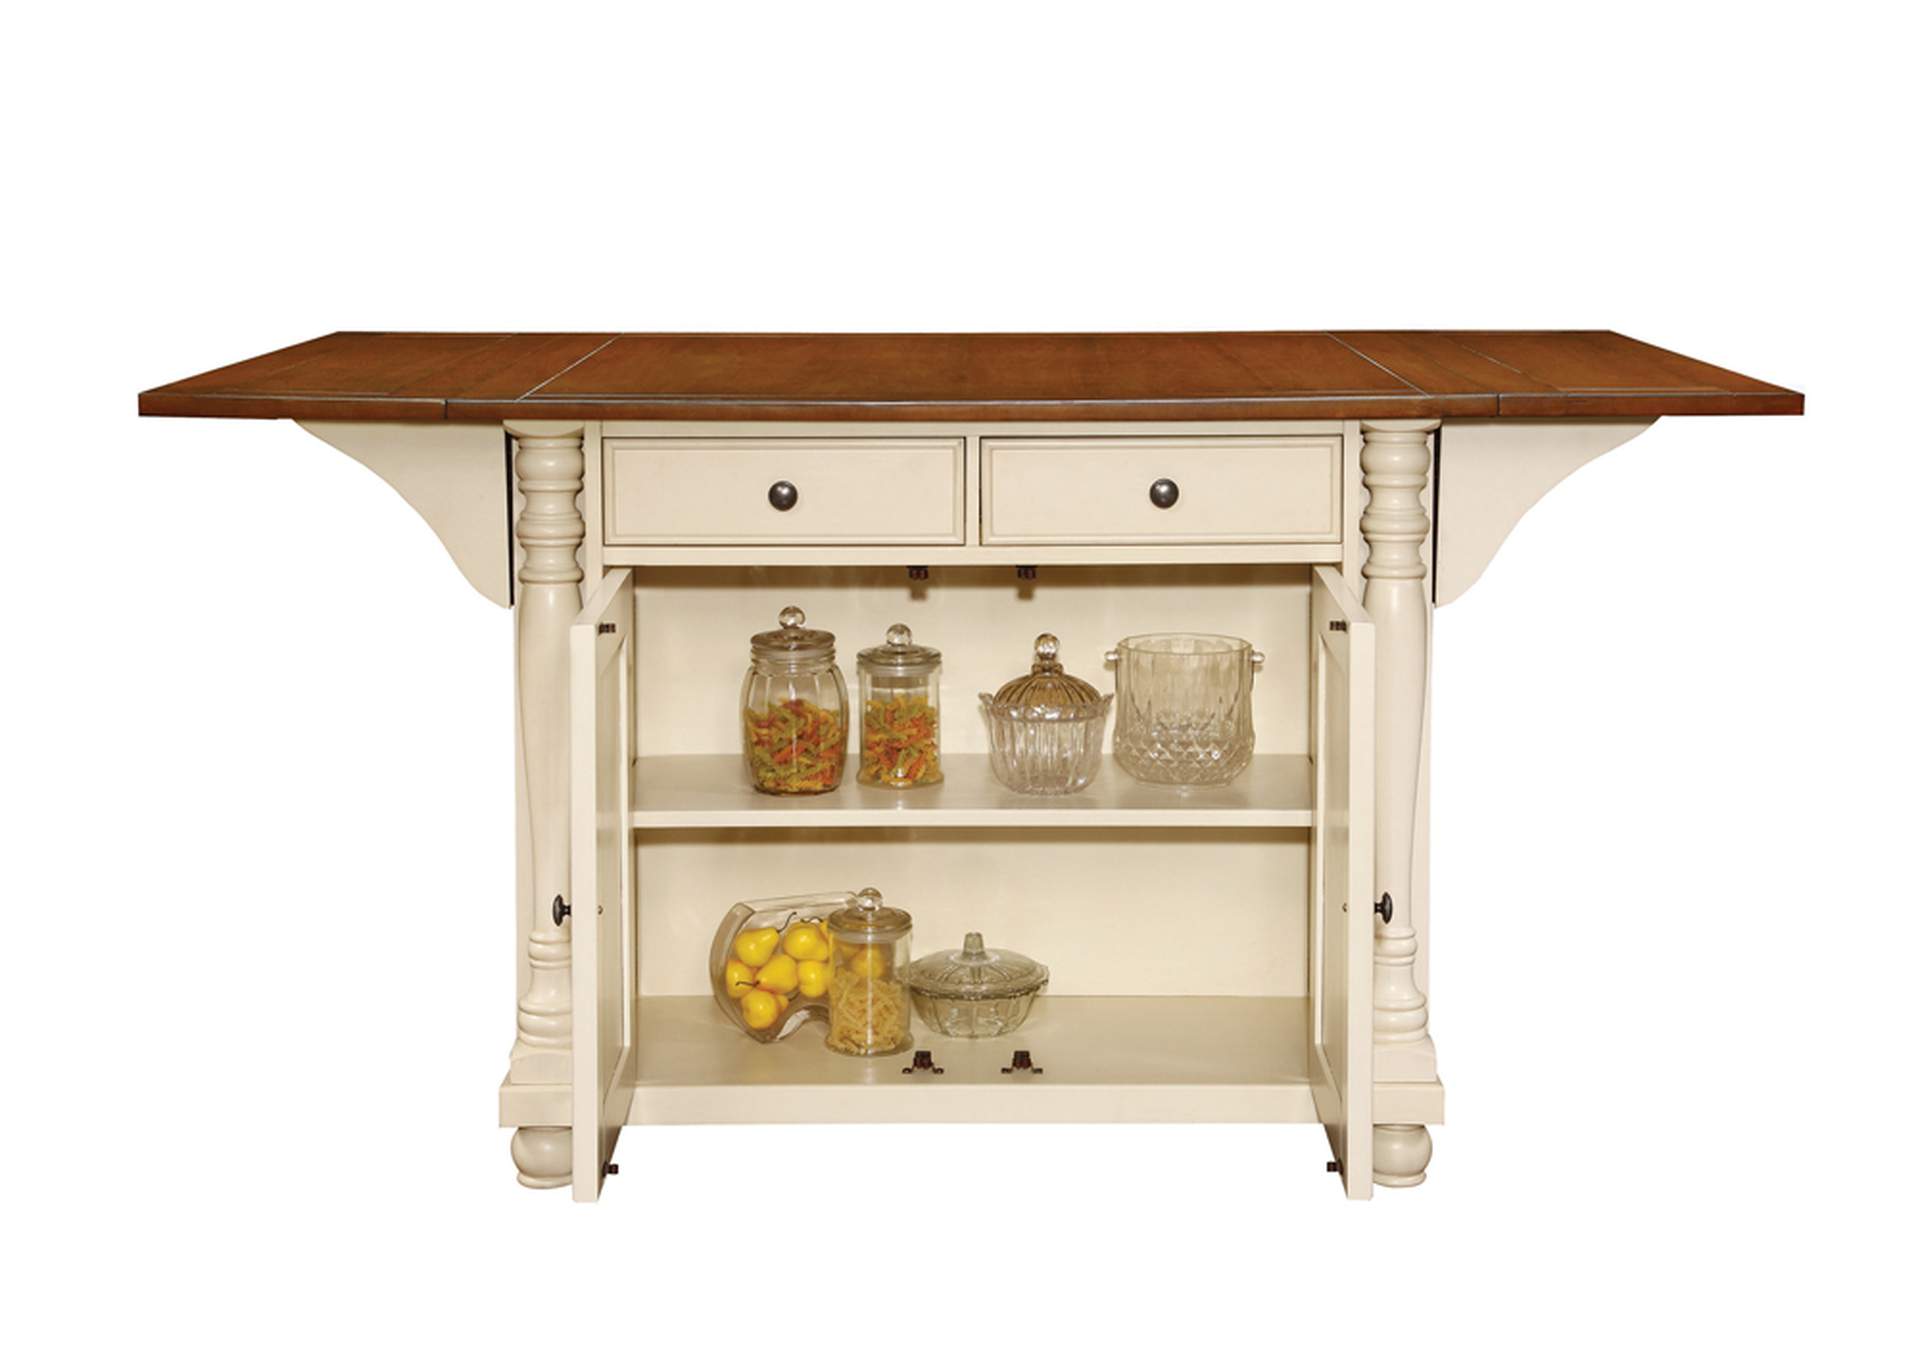 Slater 2-drawer Kitchen Island with Drop Leaves Brown and Buttermilk,Coaster Furniture